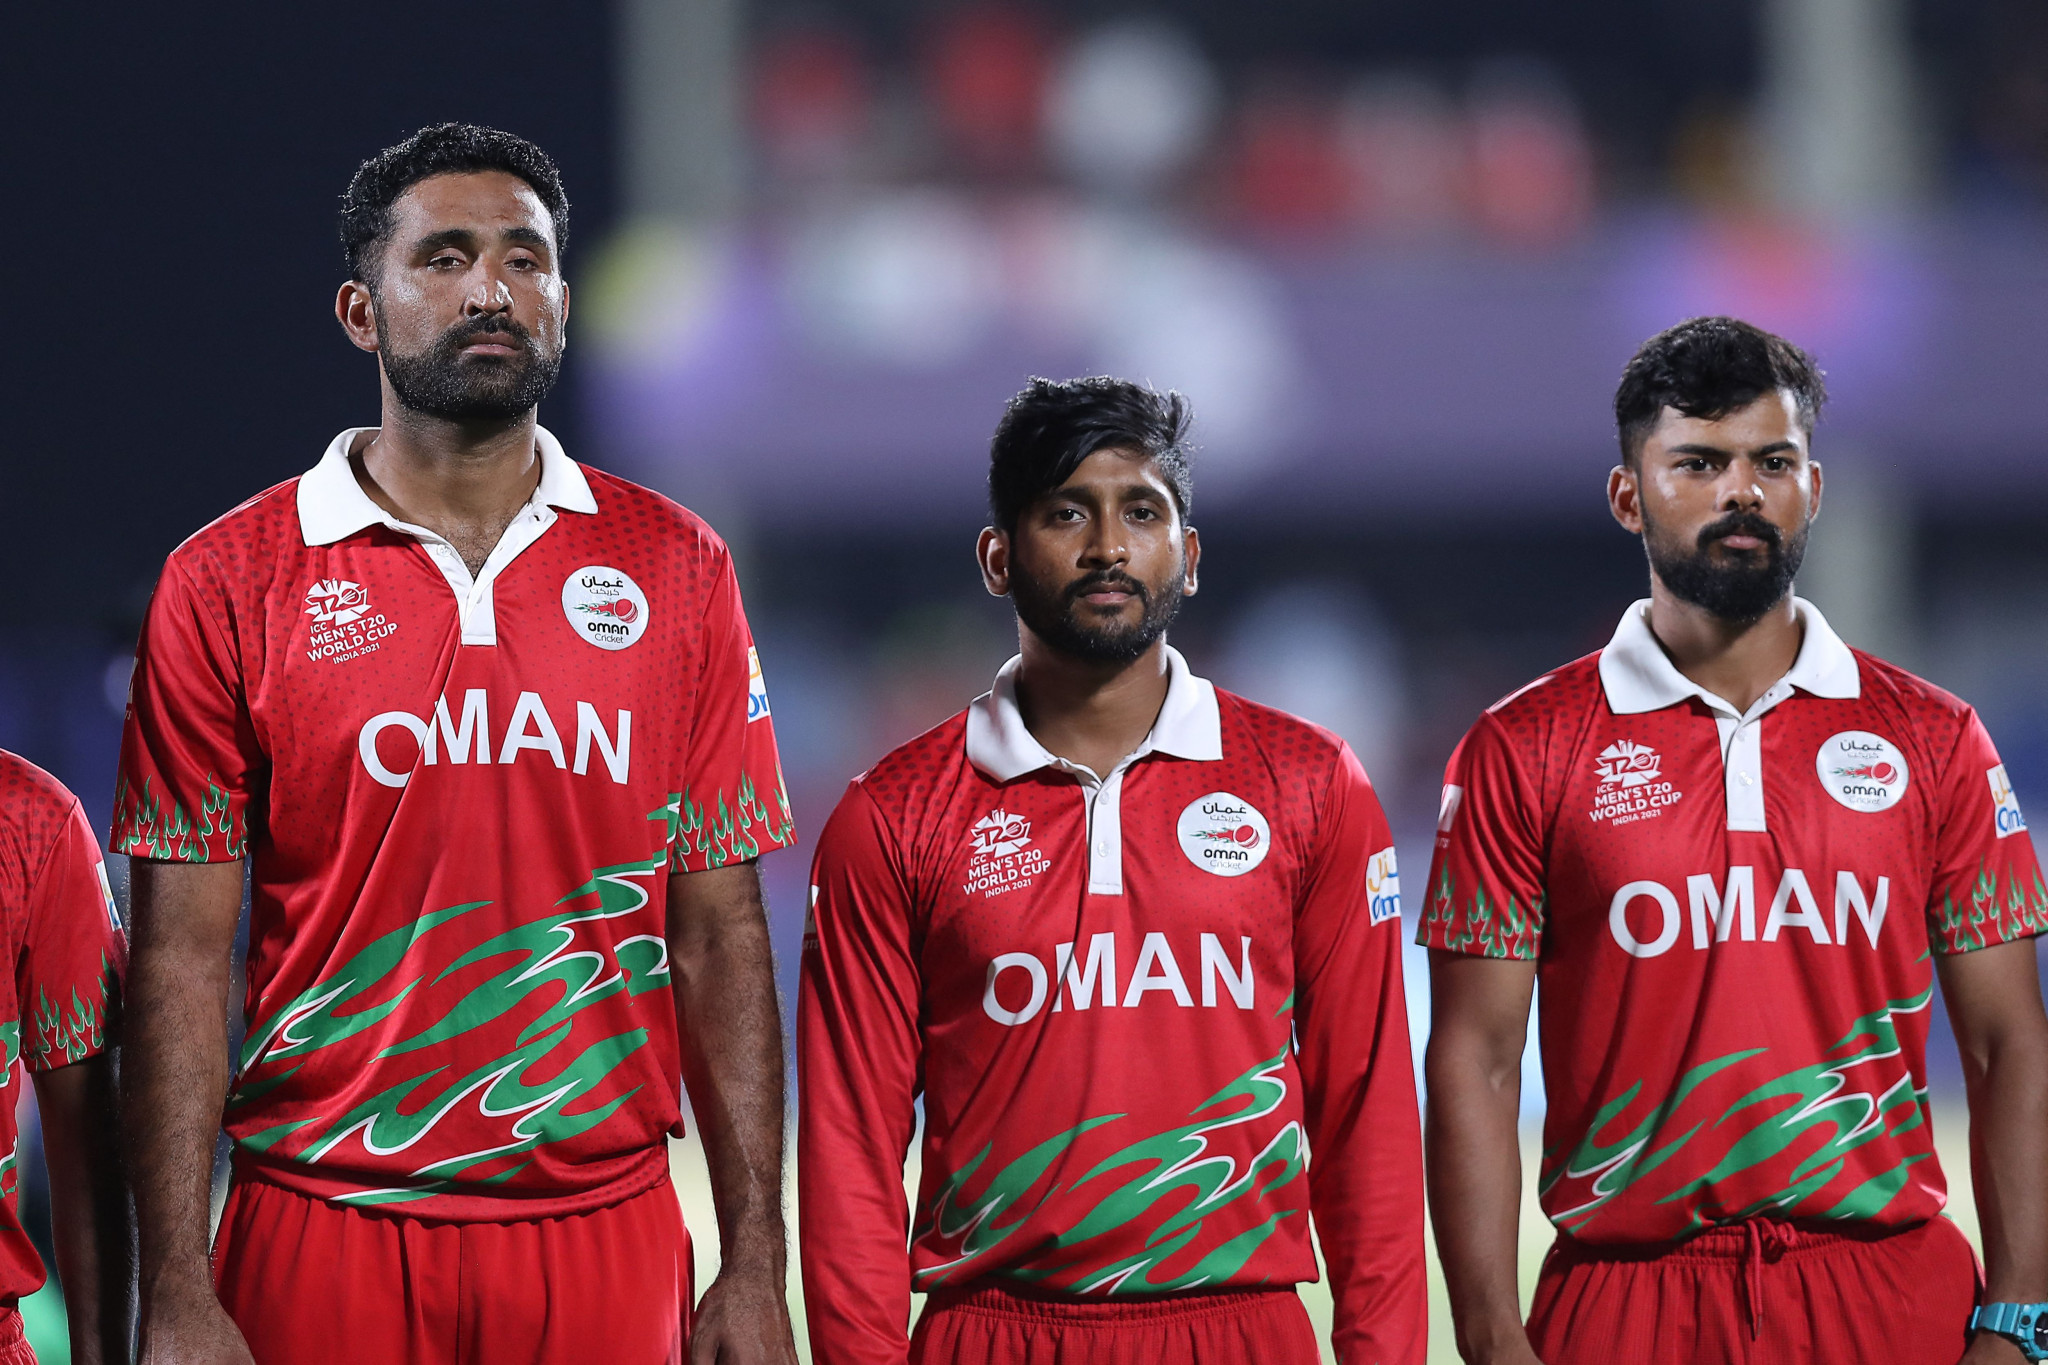 Ireland and Oman seek to live up to favourites tag and secure T20 World Cup berths